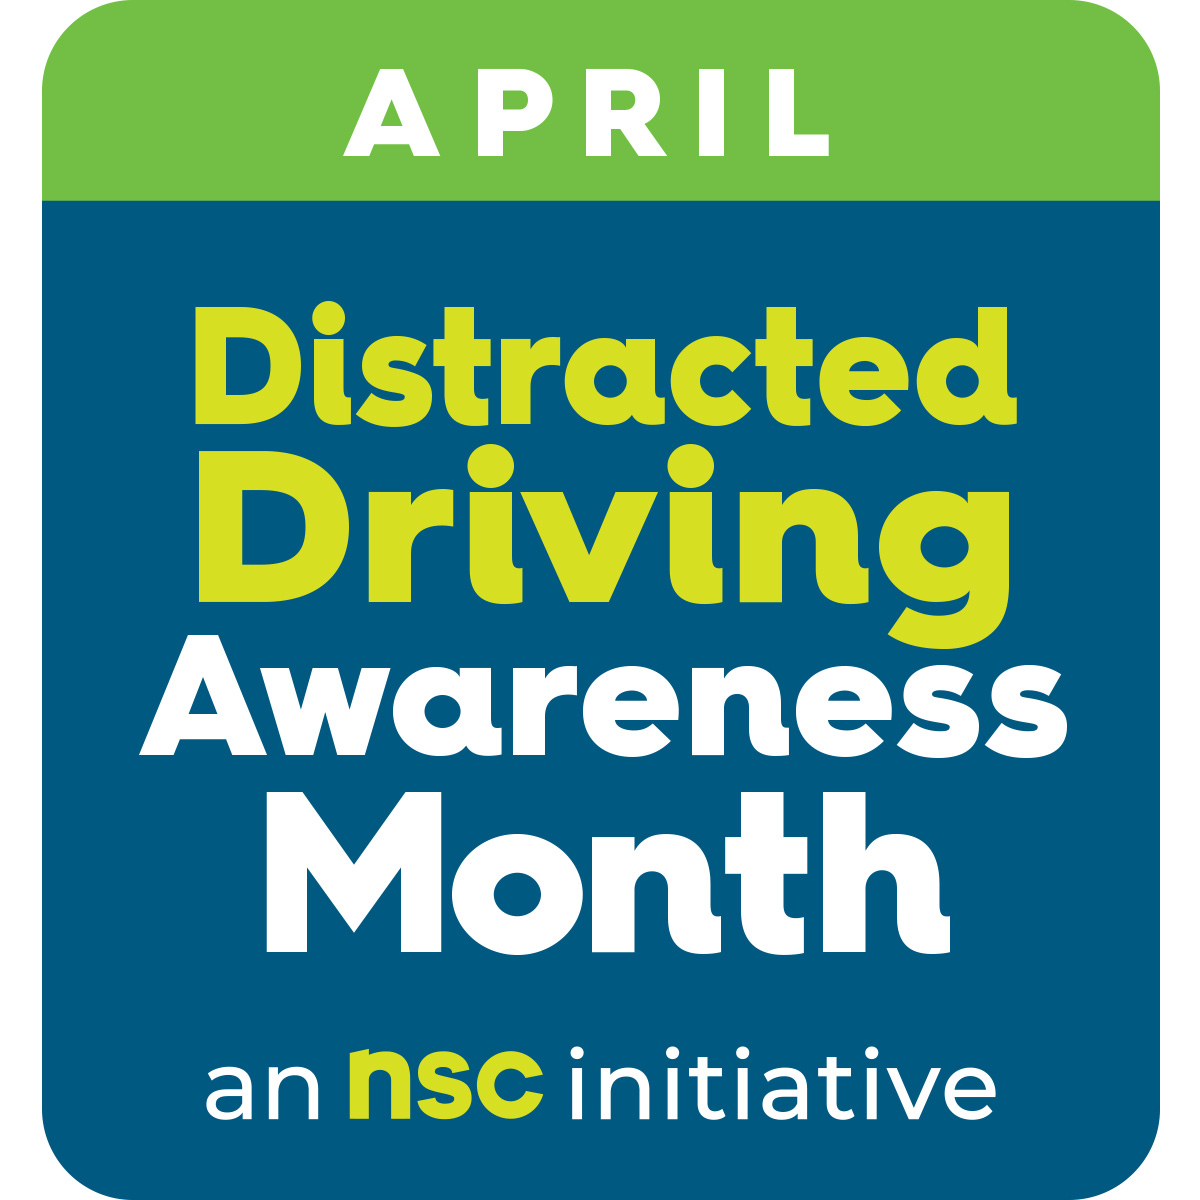 Distracted Driving Awareness Month is coming to an end, but you can commit to driving distraction-free throughout the year. Take the NSC #JustDrive pledge here: bit.ly/NSCddampledge. #DDAM #RoadwaySafety